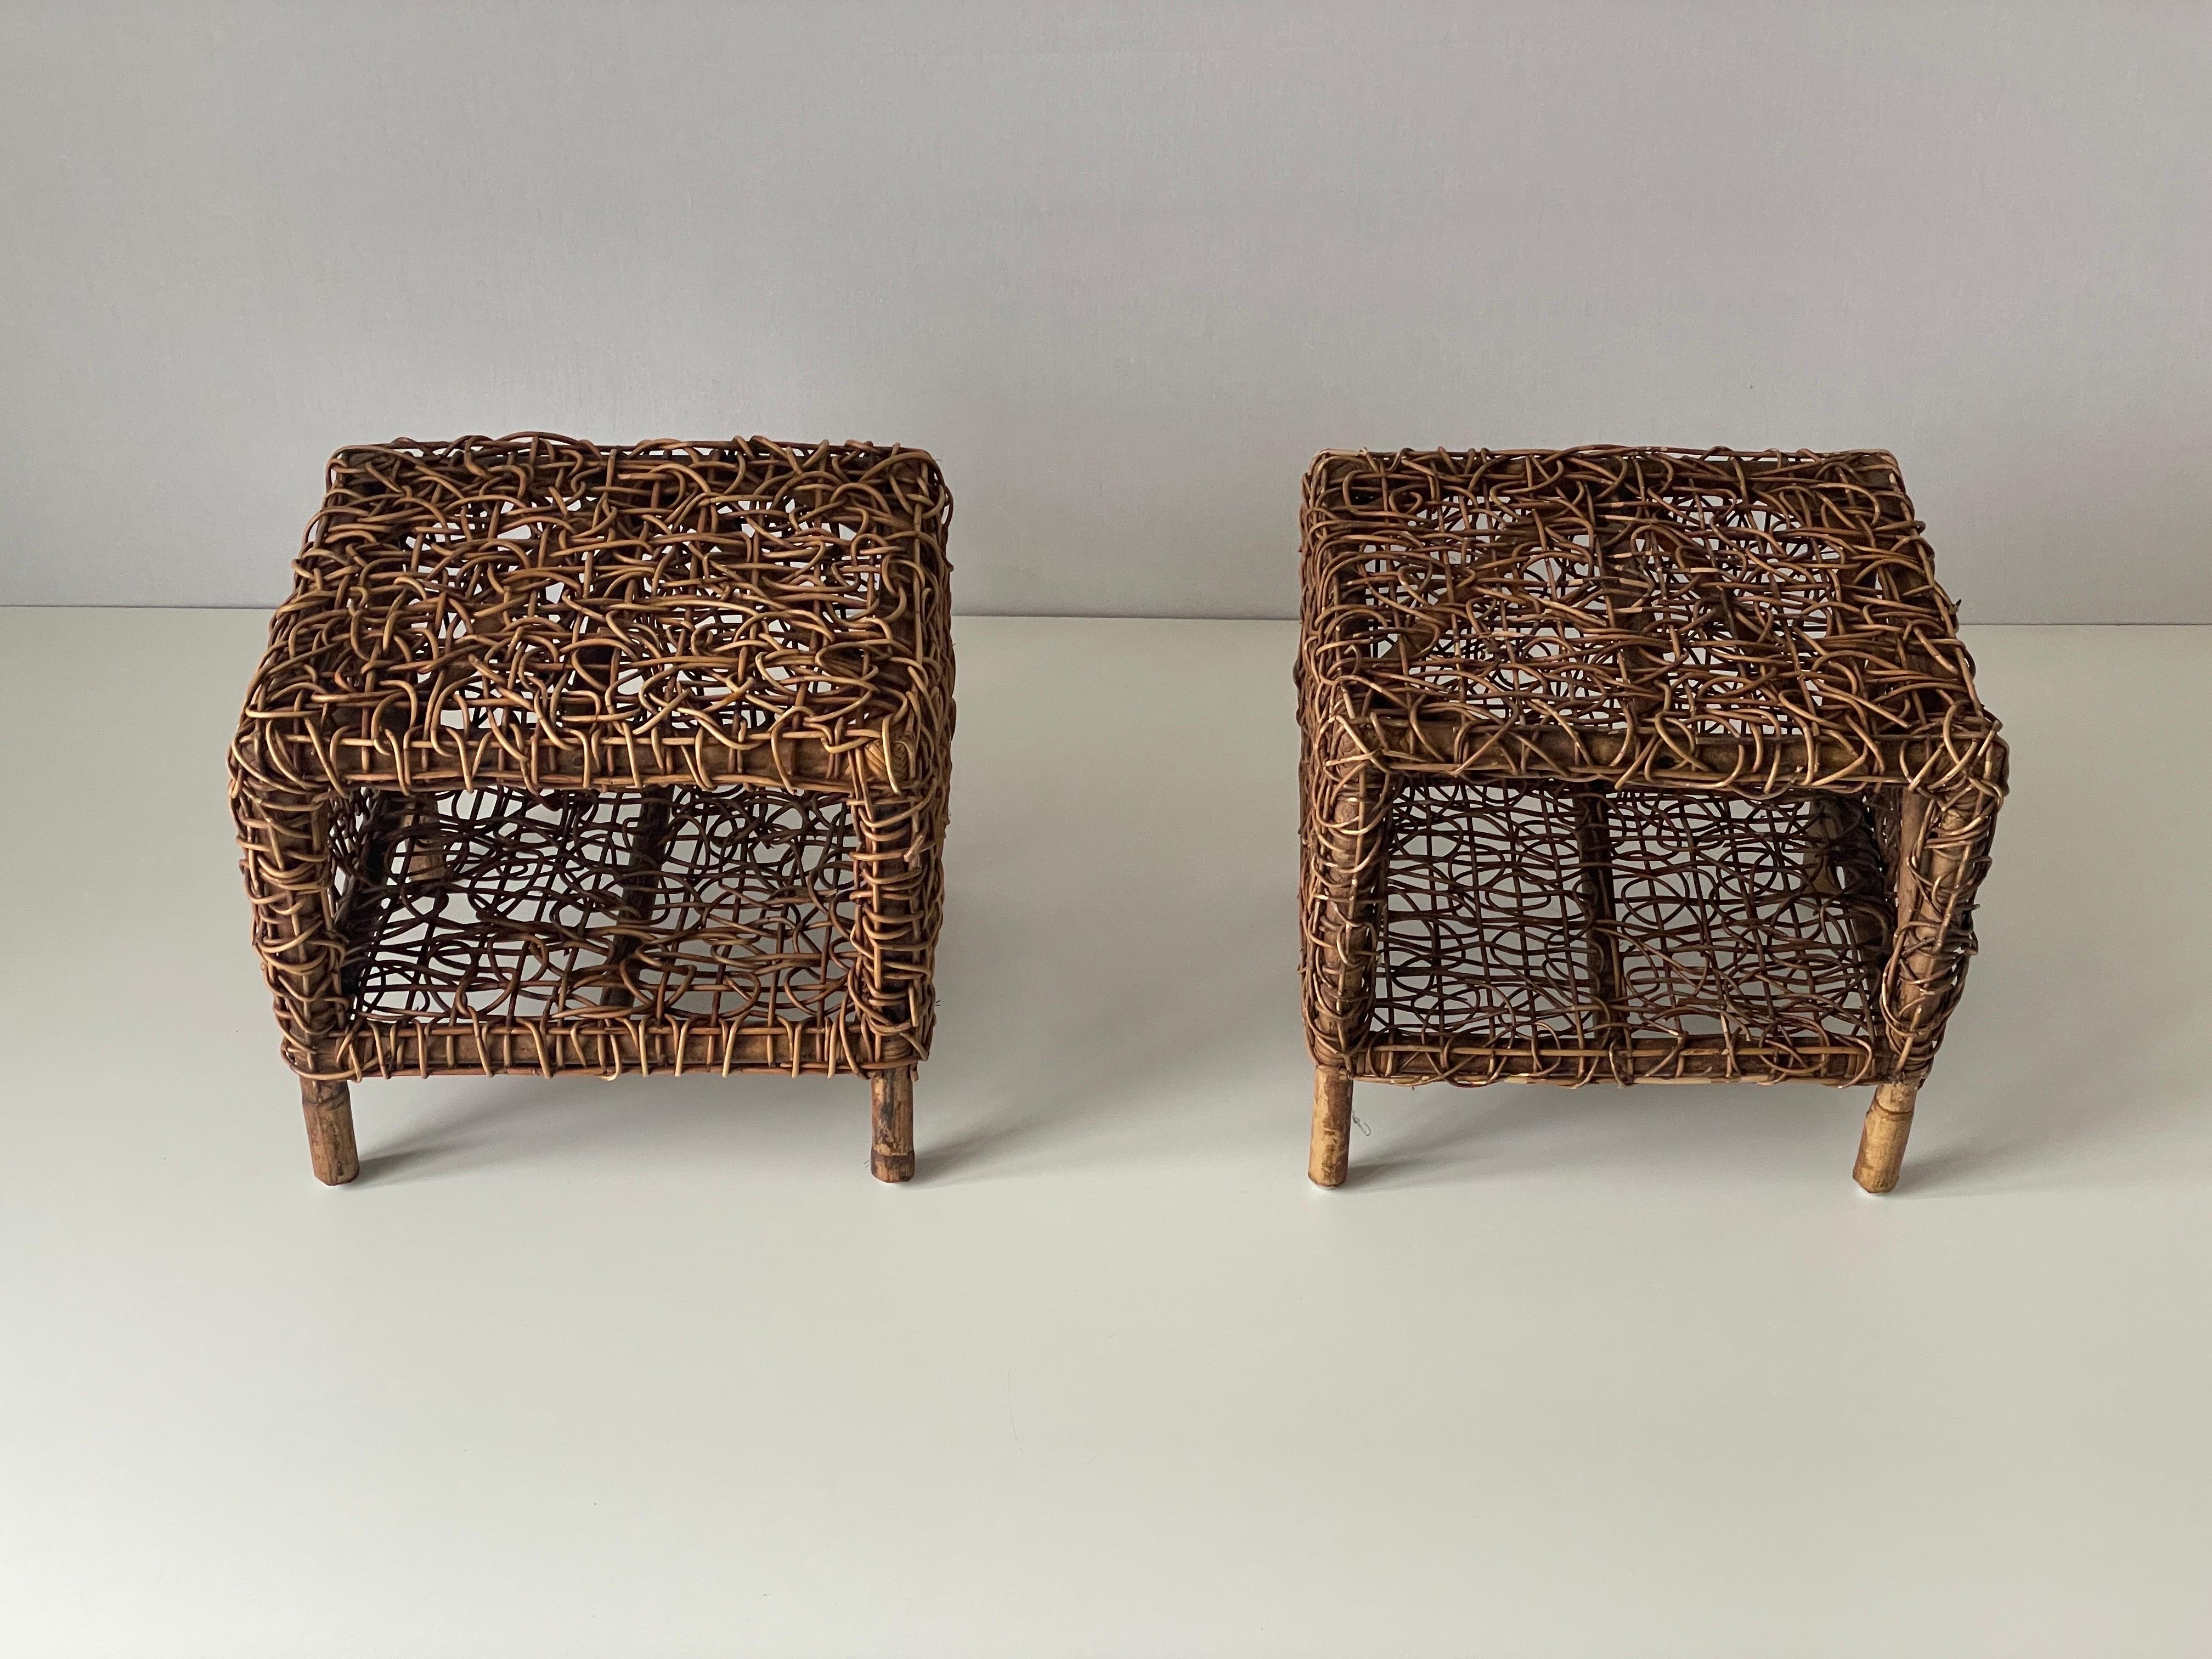 Italian Unusual Design Woven Bamboo Pair of Bedside Tables, 1960s, Italy For Sale